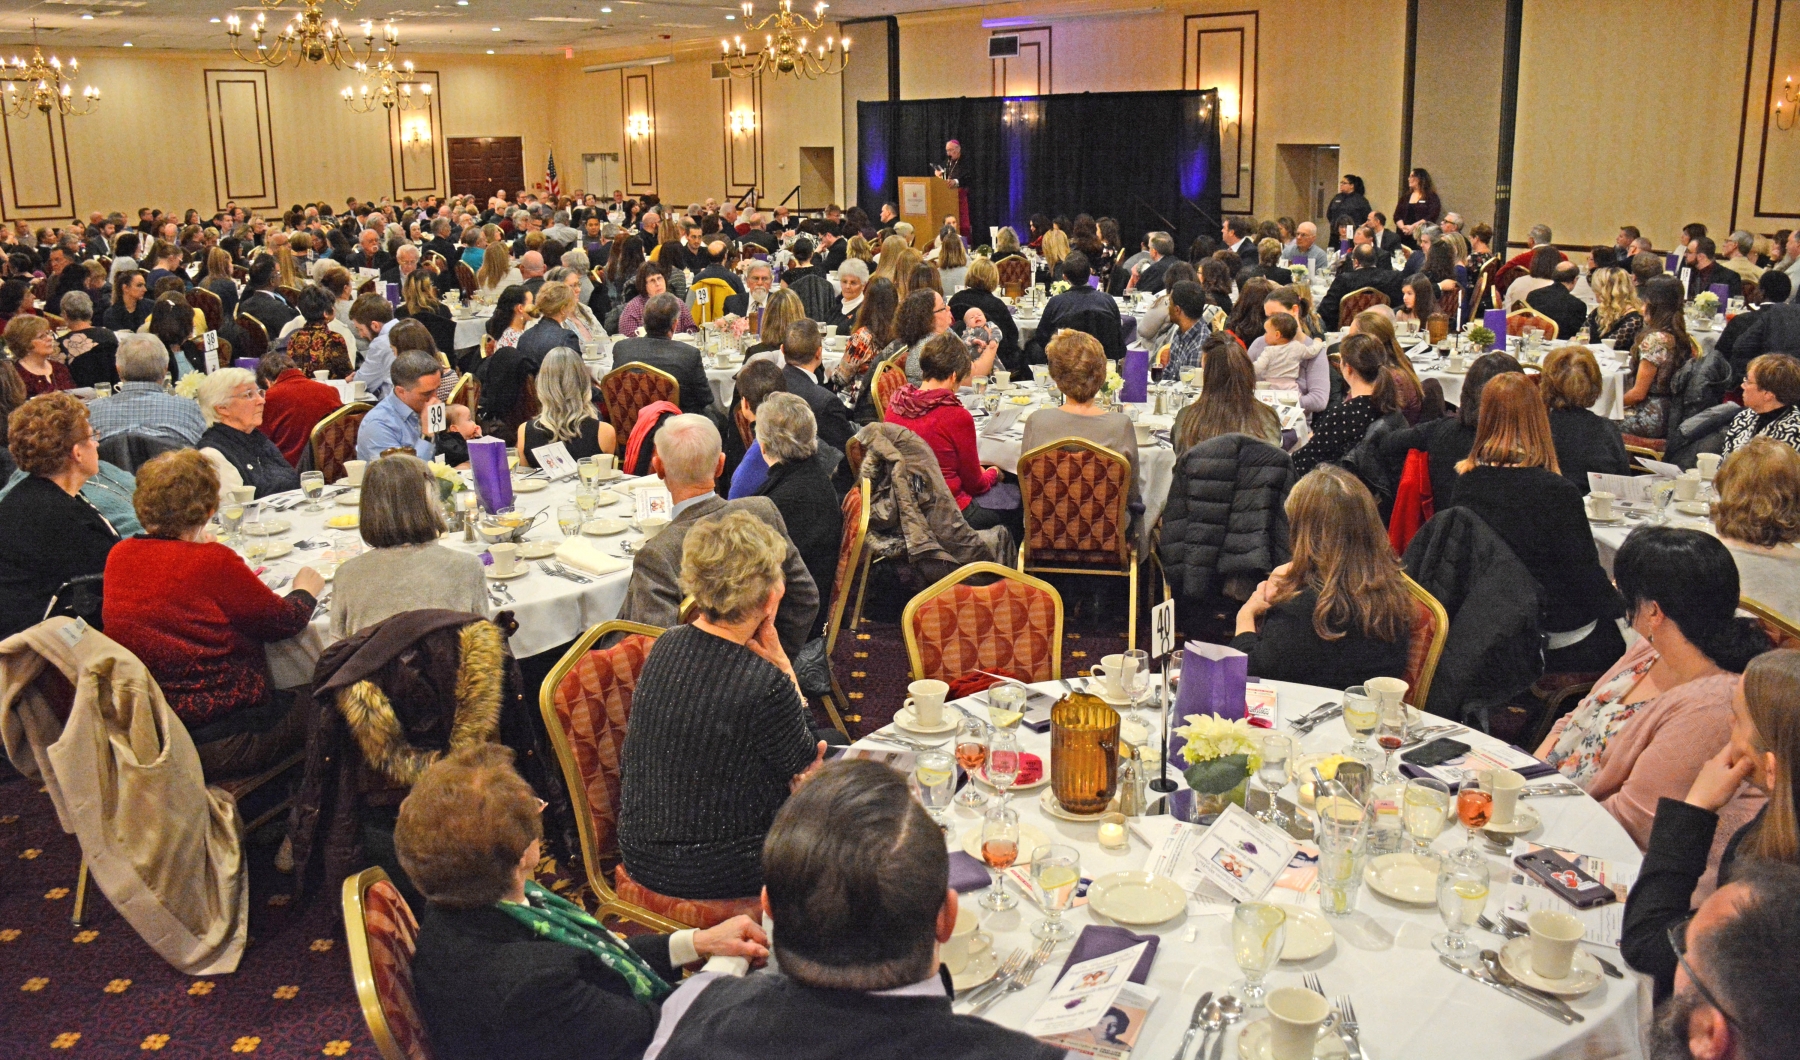 Bishop Richard J. Malone speaks as hundreds of people attend the eight annual benefit banquet for the St. Gianna Molla Pregnancy Outreach Center at the Millennium Hotel  on February 26th. Bishop Richard J. Malone and others spoke at the benefit.The St. Gianna Molla Pregnancy Outreach Center has helped countless pregnant women since its inception and is a resource for area hospitals, courts and referring agencies.
Dan Cappellazzo/Staff Photographer
